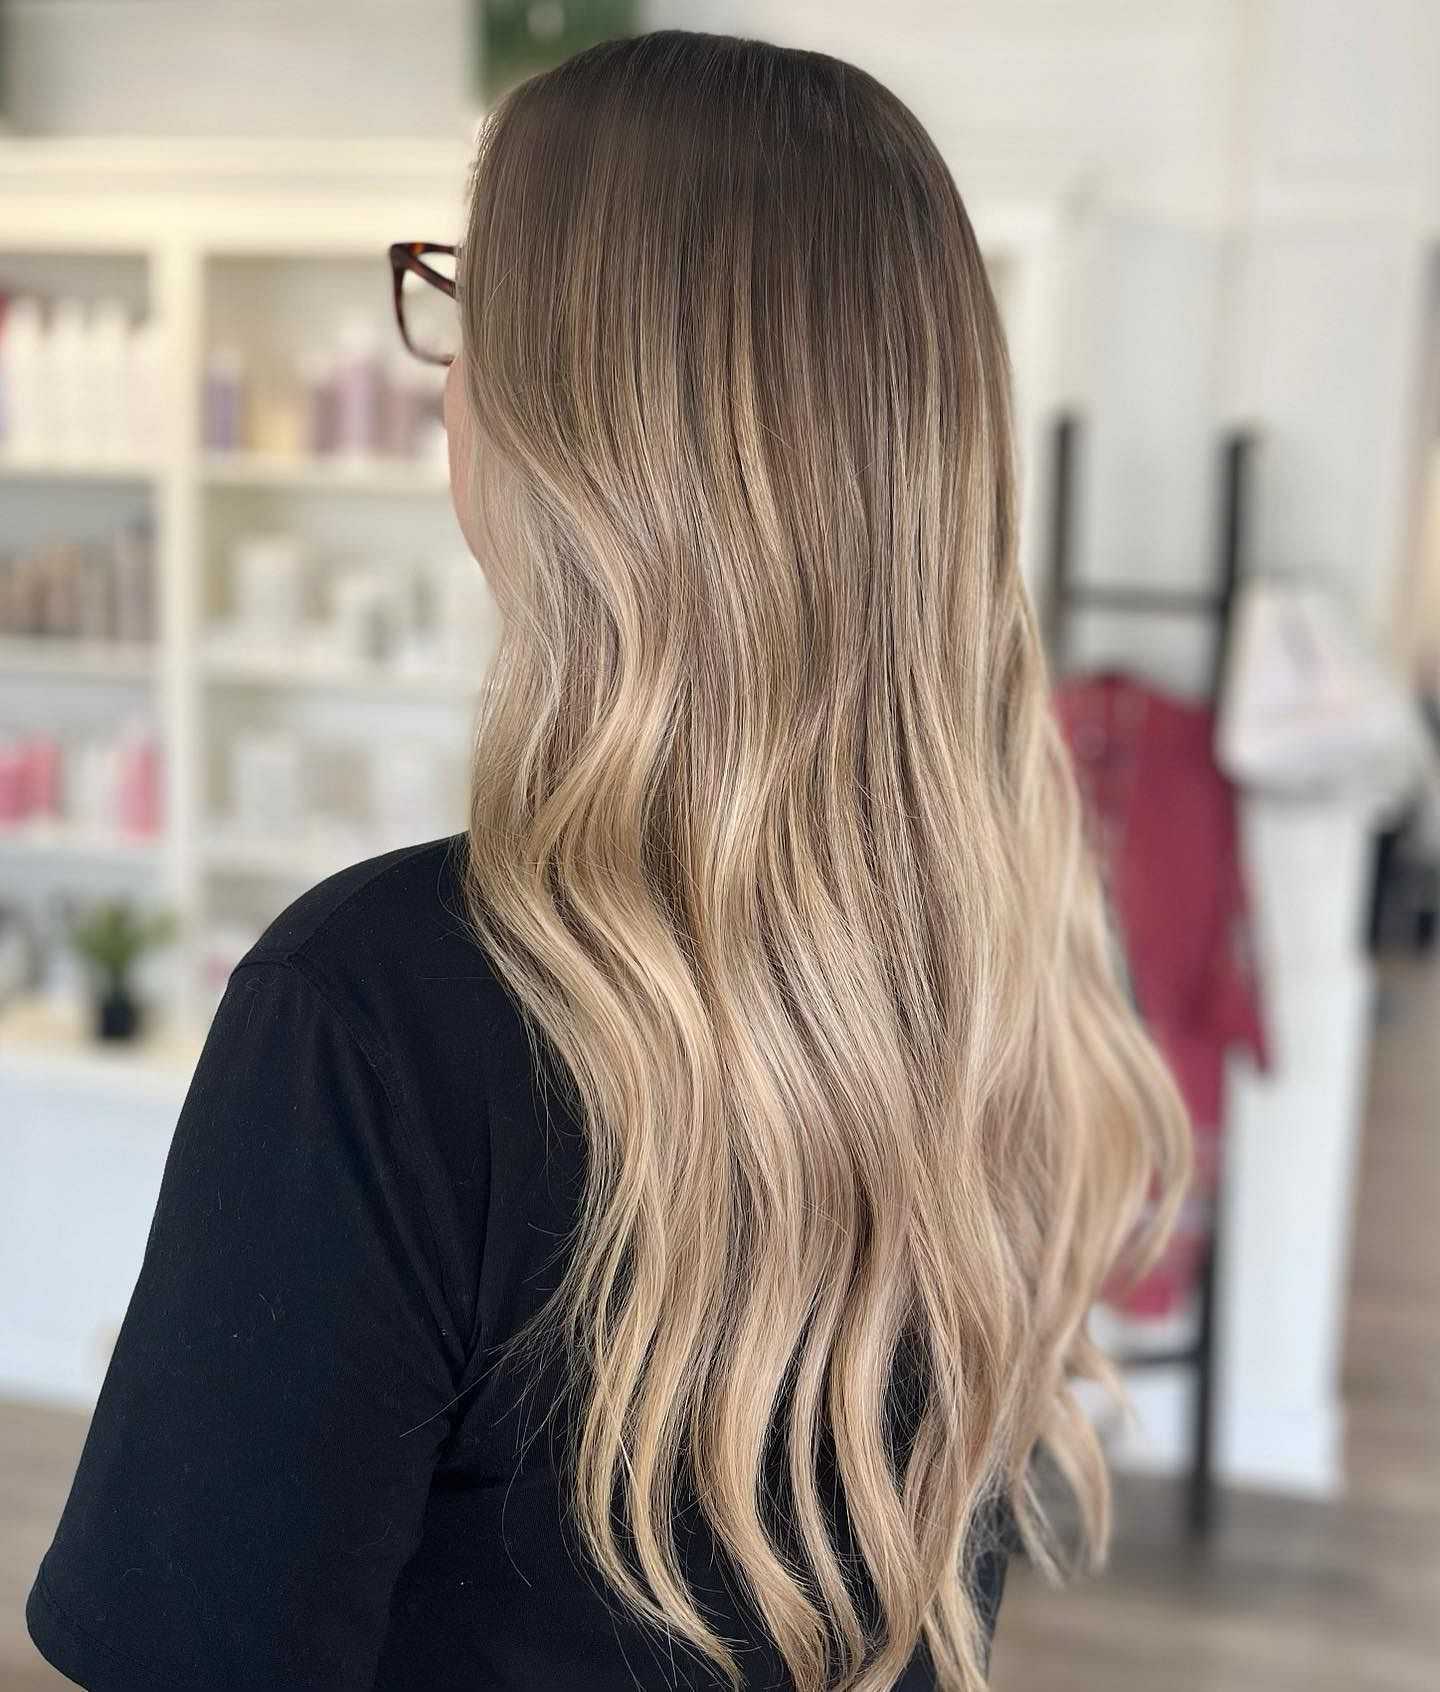 Person with long, wavy ombre hair, viewed from behind.